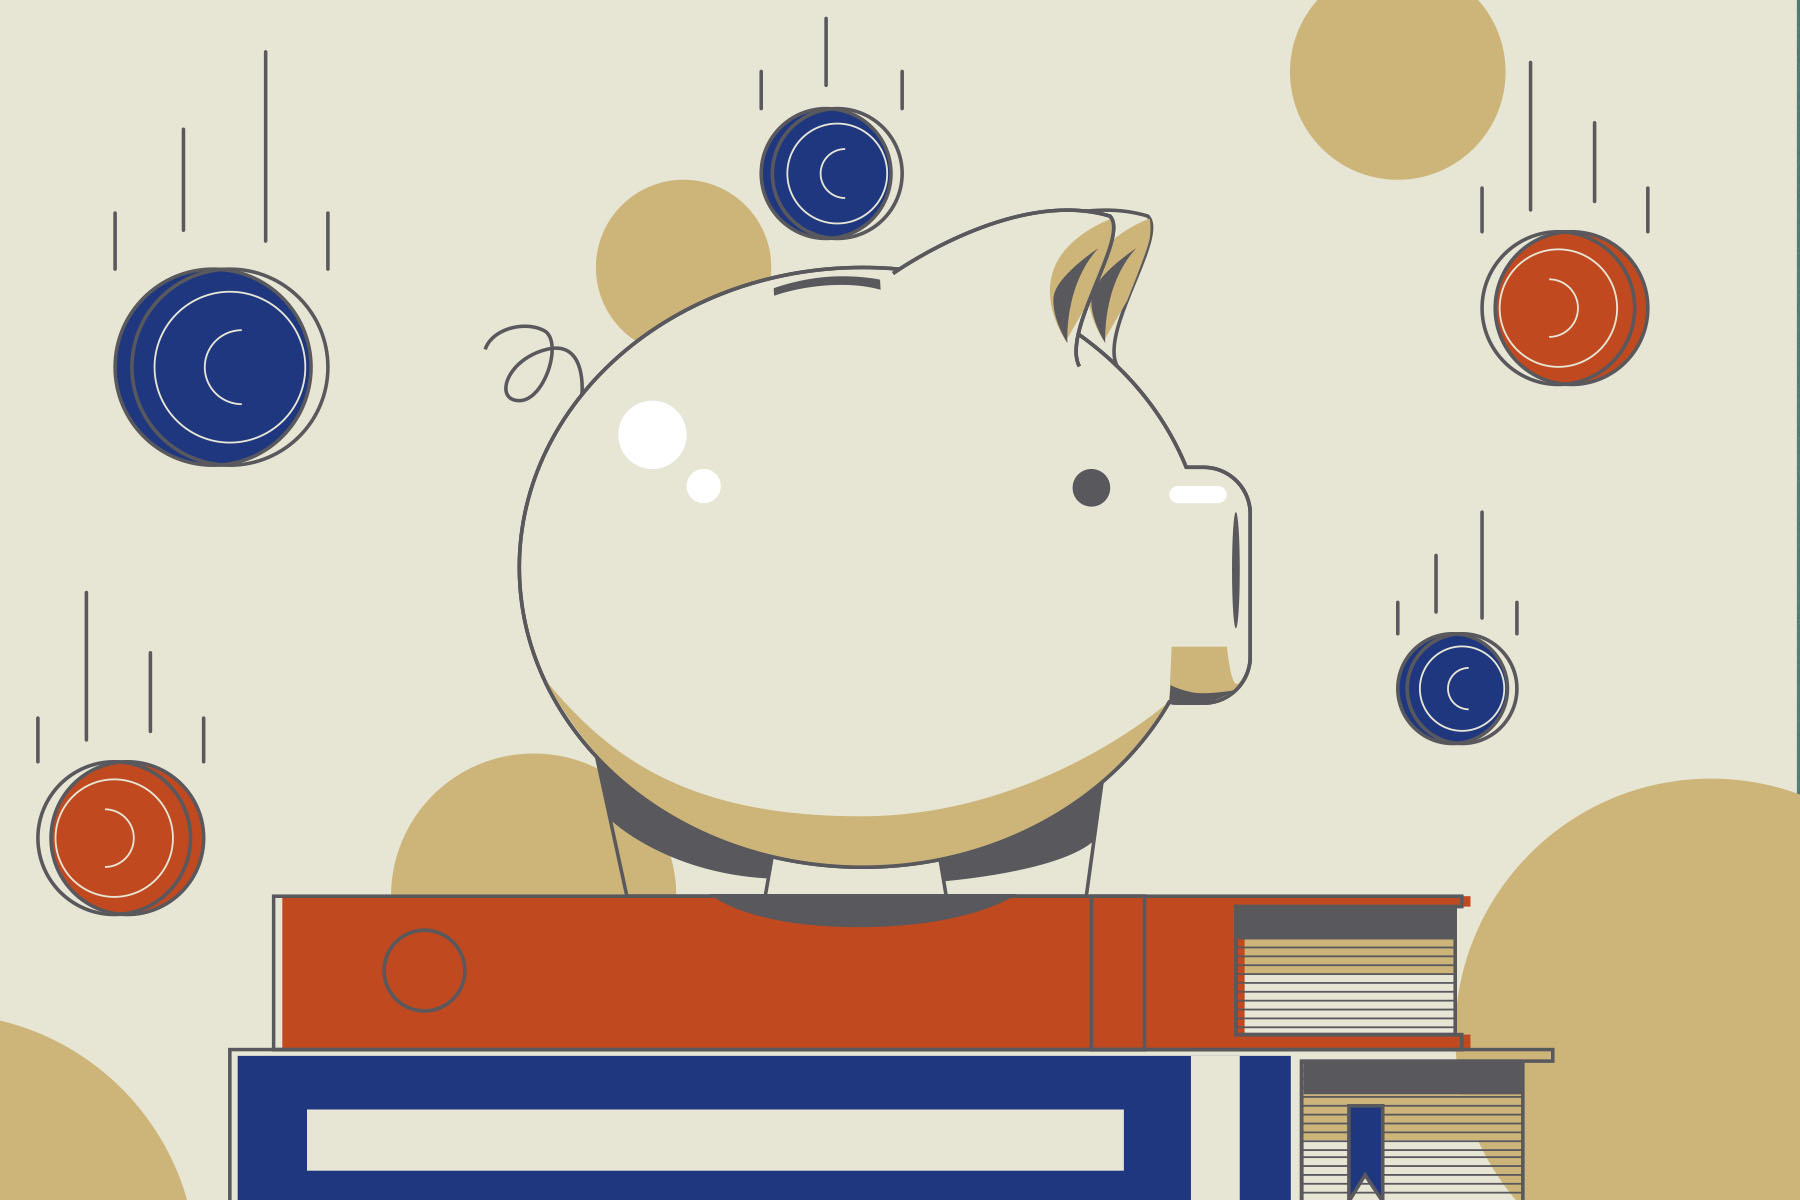 An illustration of a piggy bank on top of a small pile of books, as coins rain down around it.